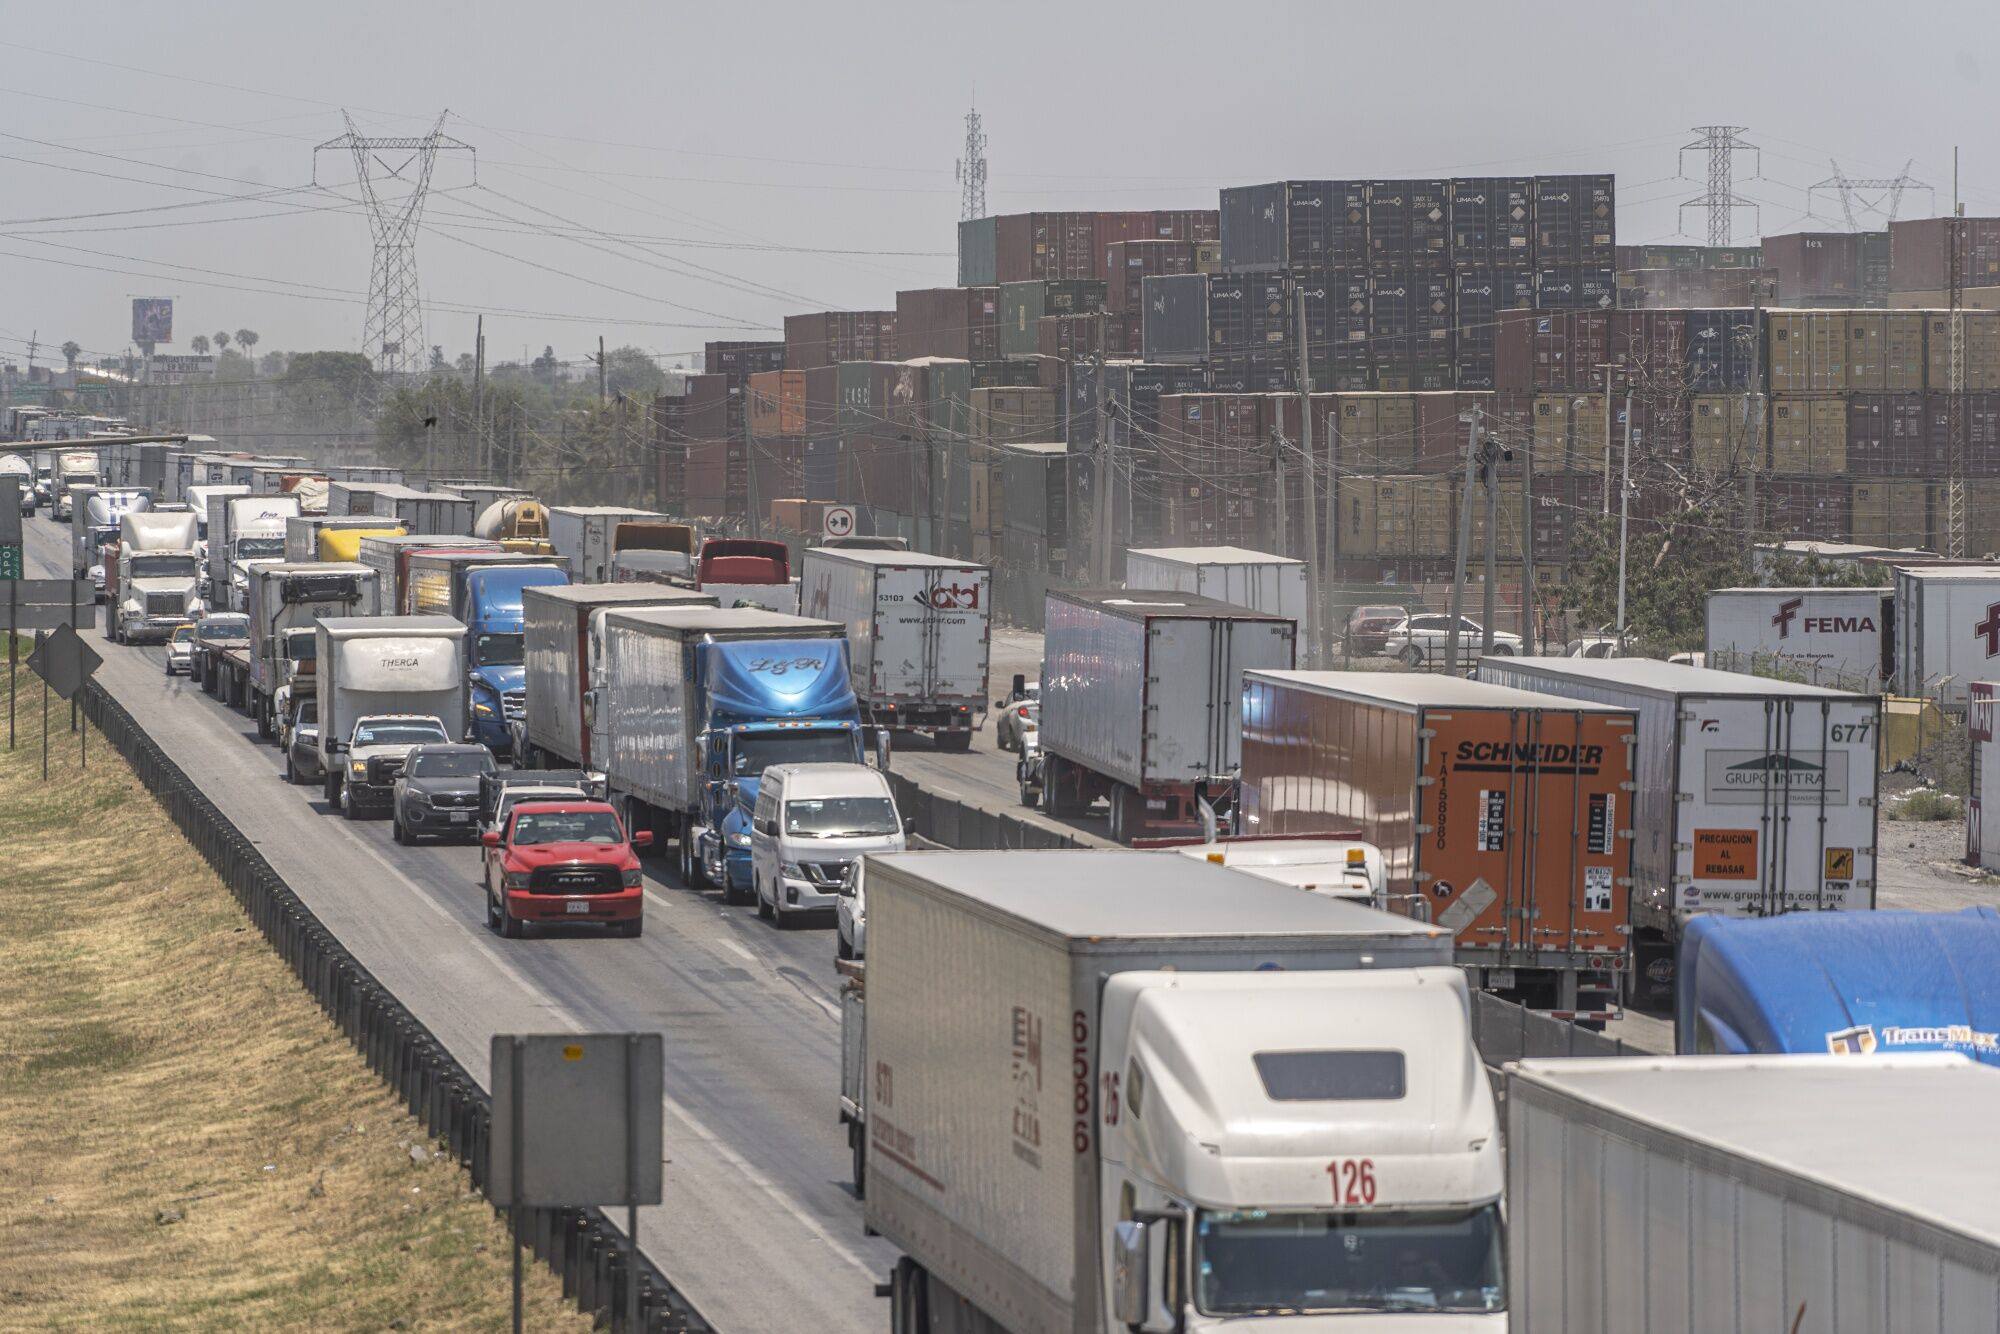 Traffic near a container cargo depot in Monterrey, Mexico. US-China tensions have led Washington to reduce supply-chain reliance on its geopolitical rivals and source imports from closer to home. Photo: Bloomberg